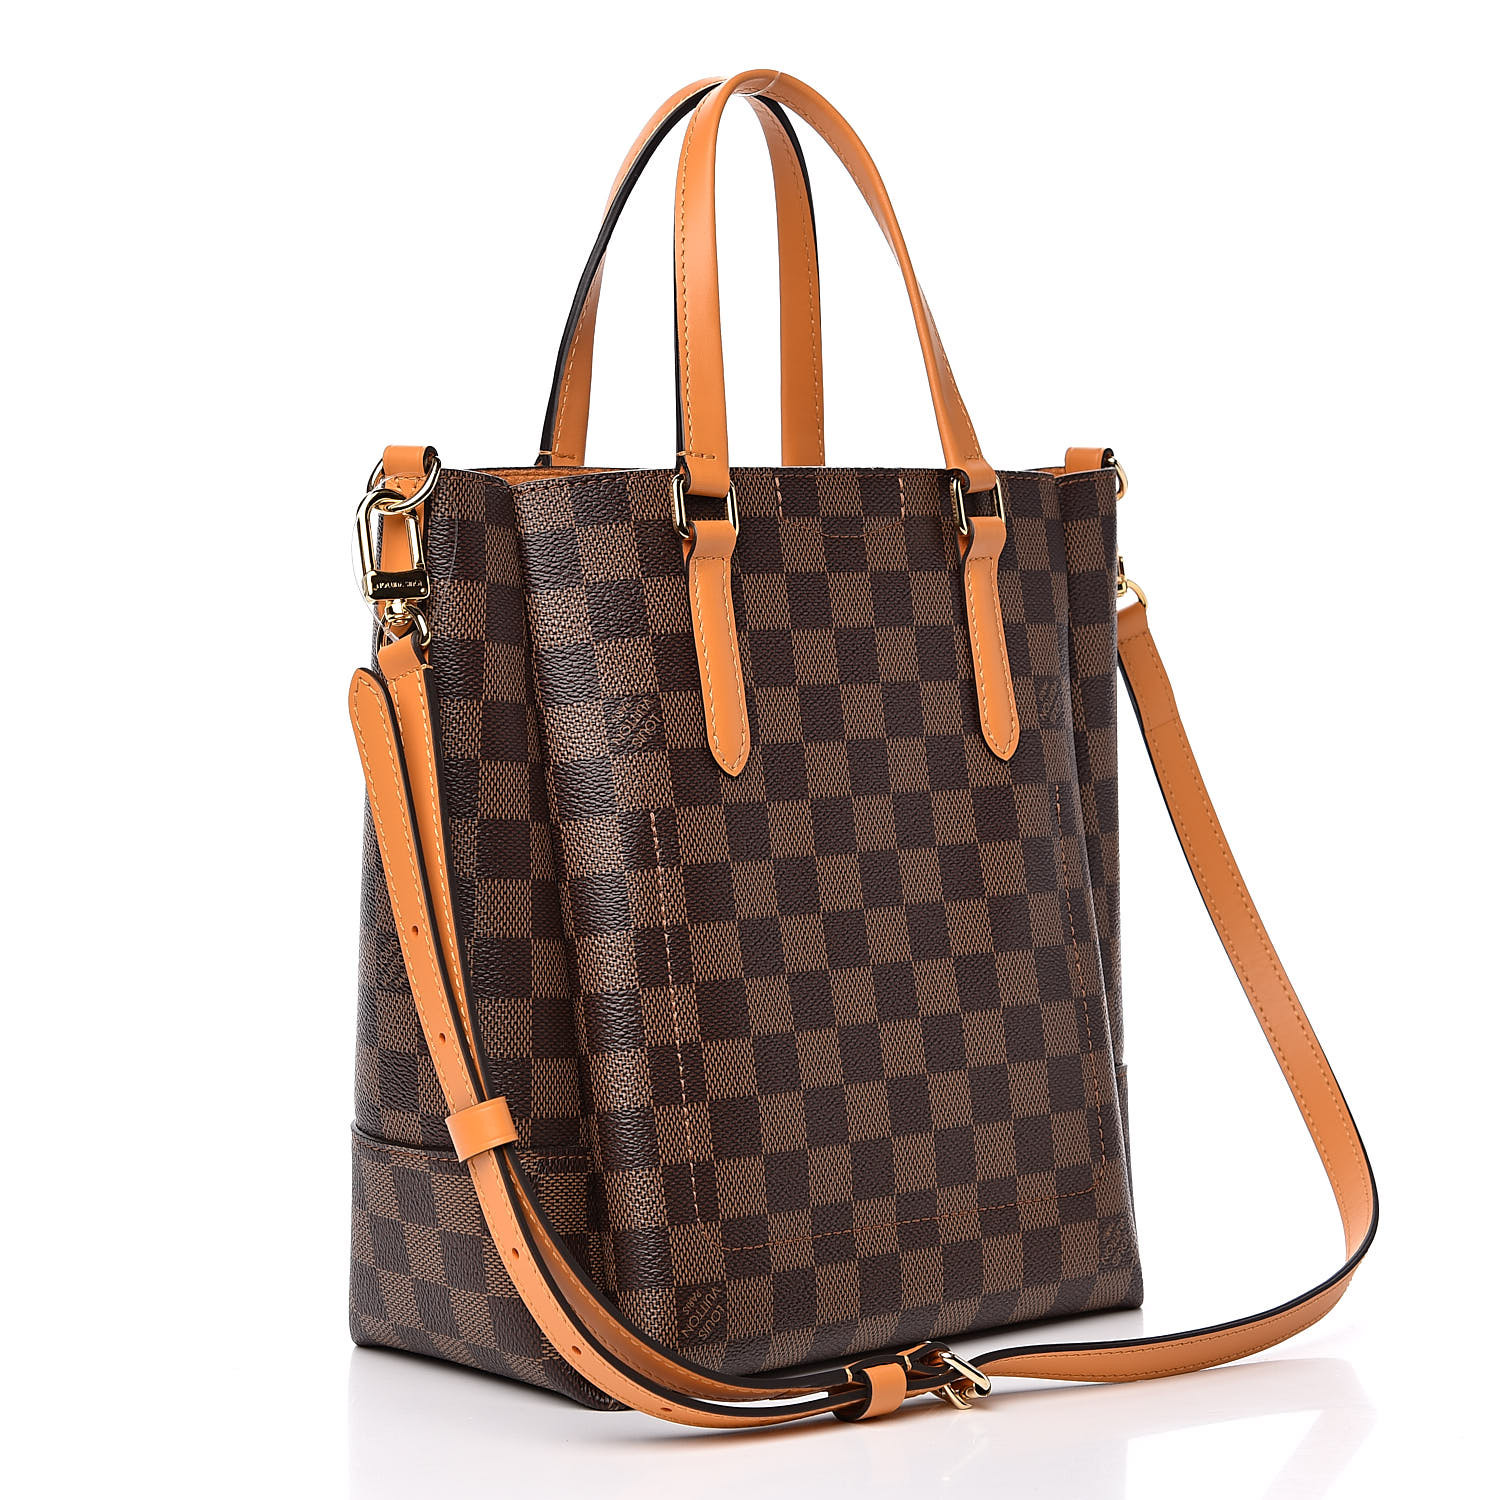 Buy Louis Vuitton Totally PM in Damier Ebene Coated Canvas in Good Online  in India 